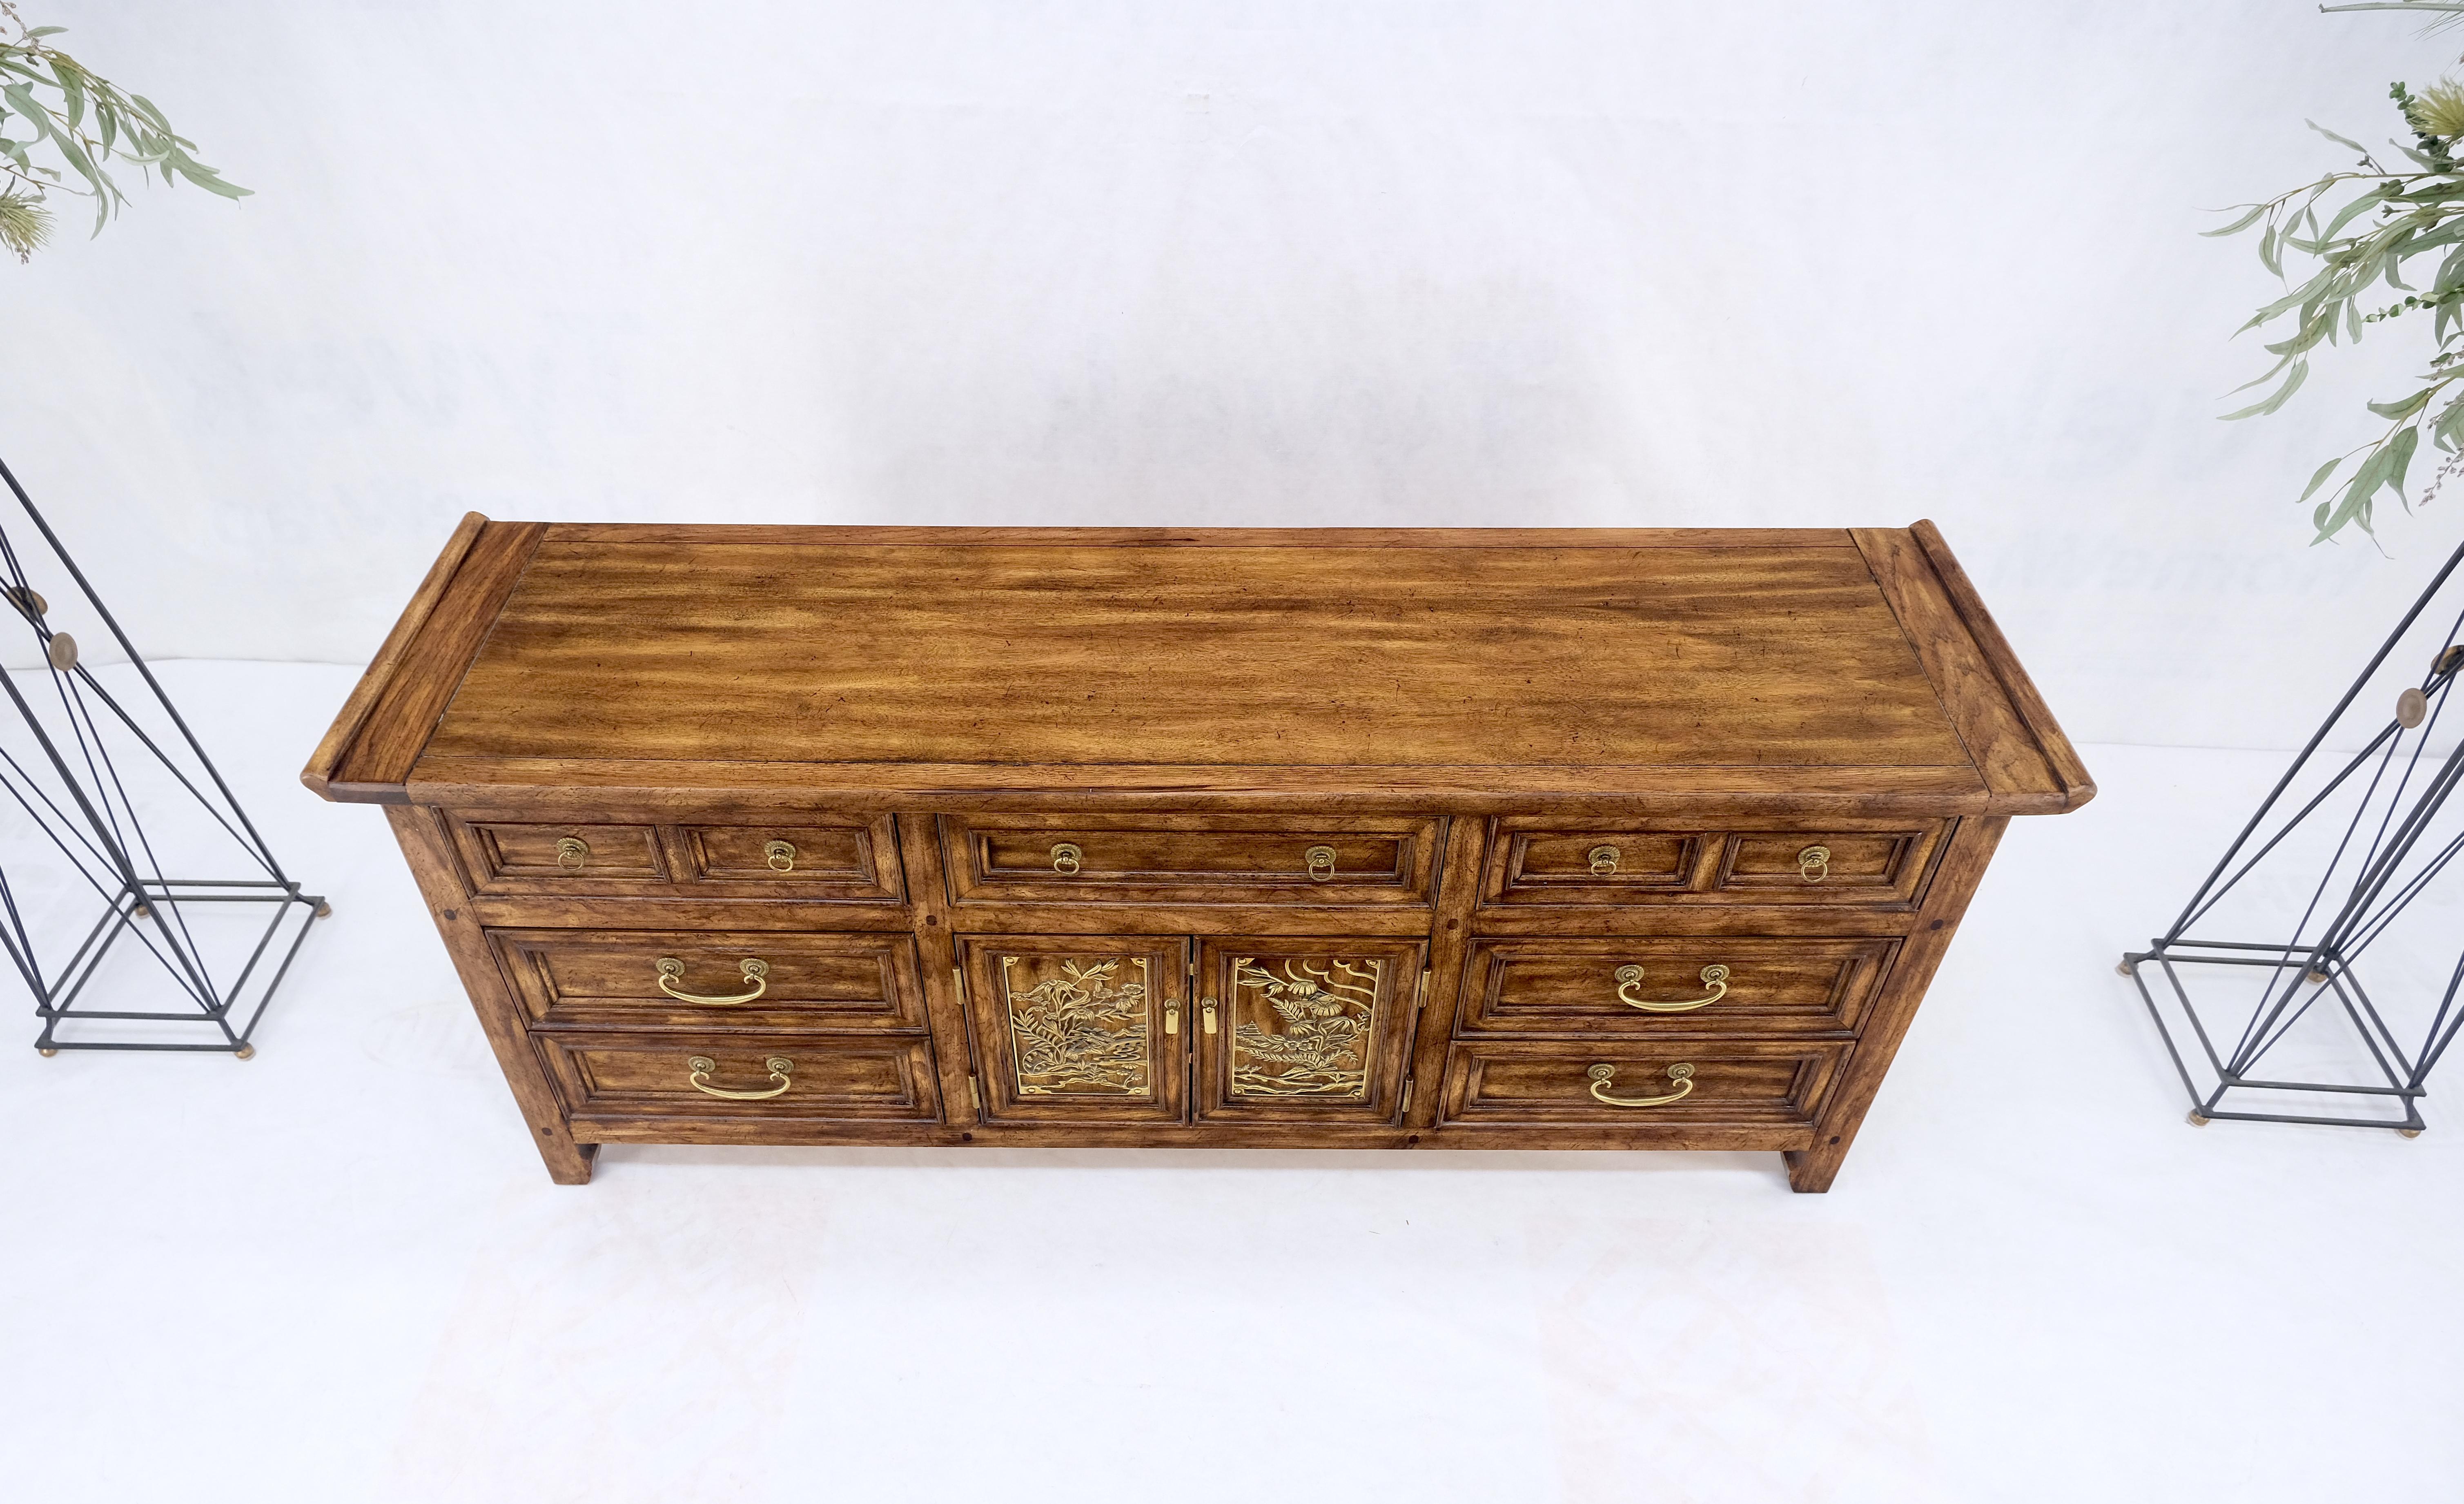 9 Drawers Two Decorative Doors Solid Brass Buckle Drop Pull Rolled Edges Dresser In Good Condition For Sale In Rockaway, NJ